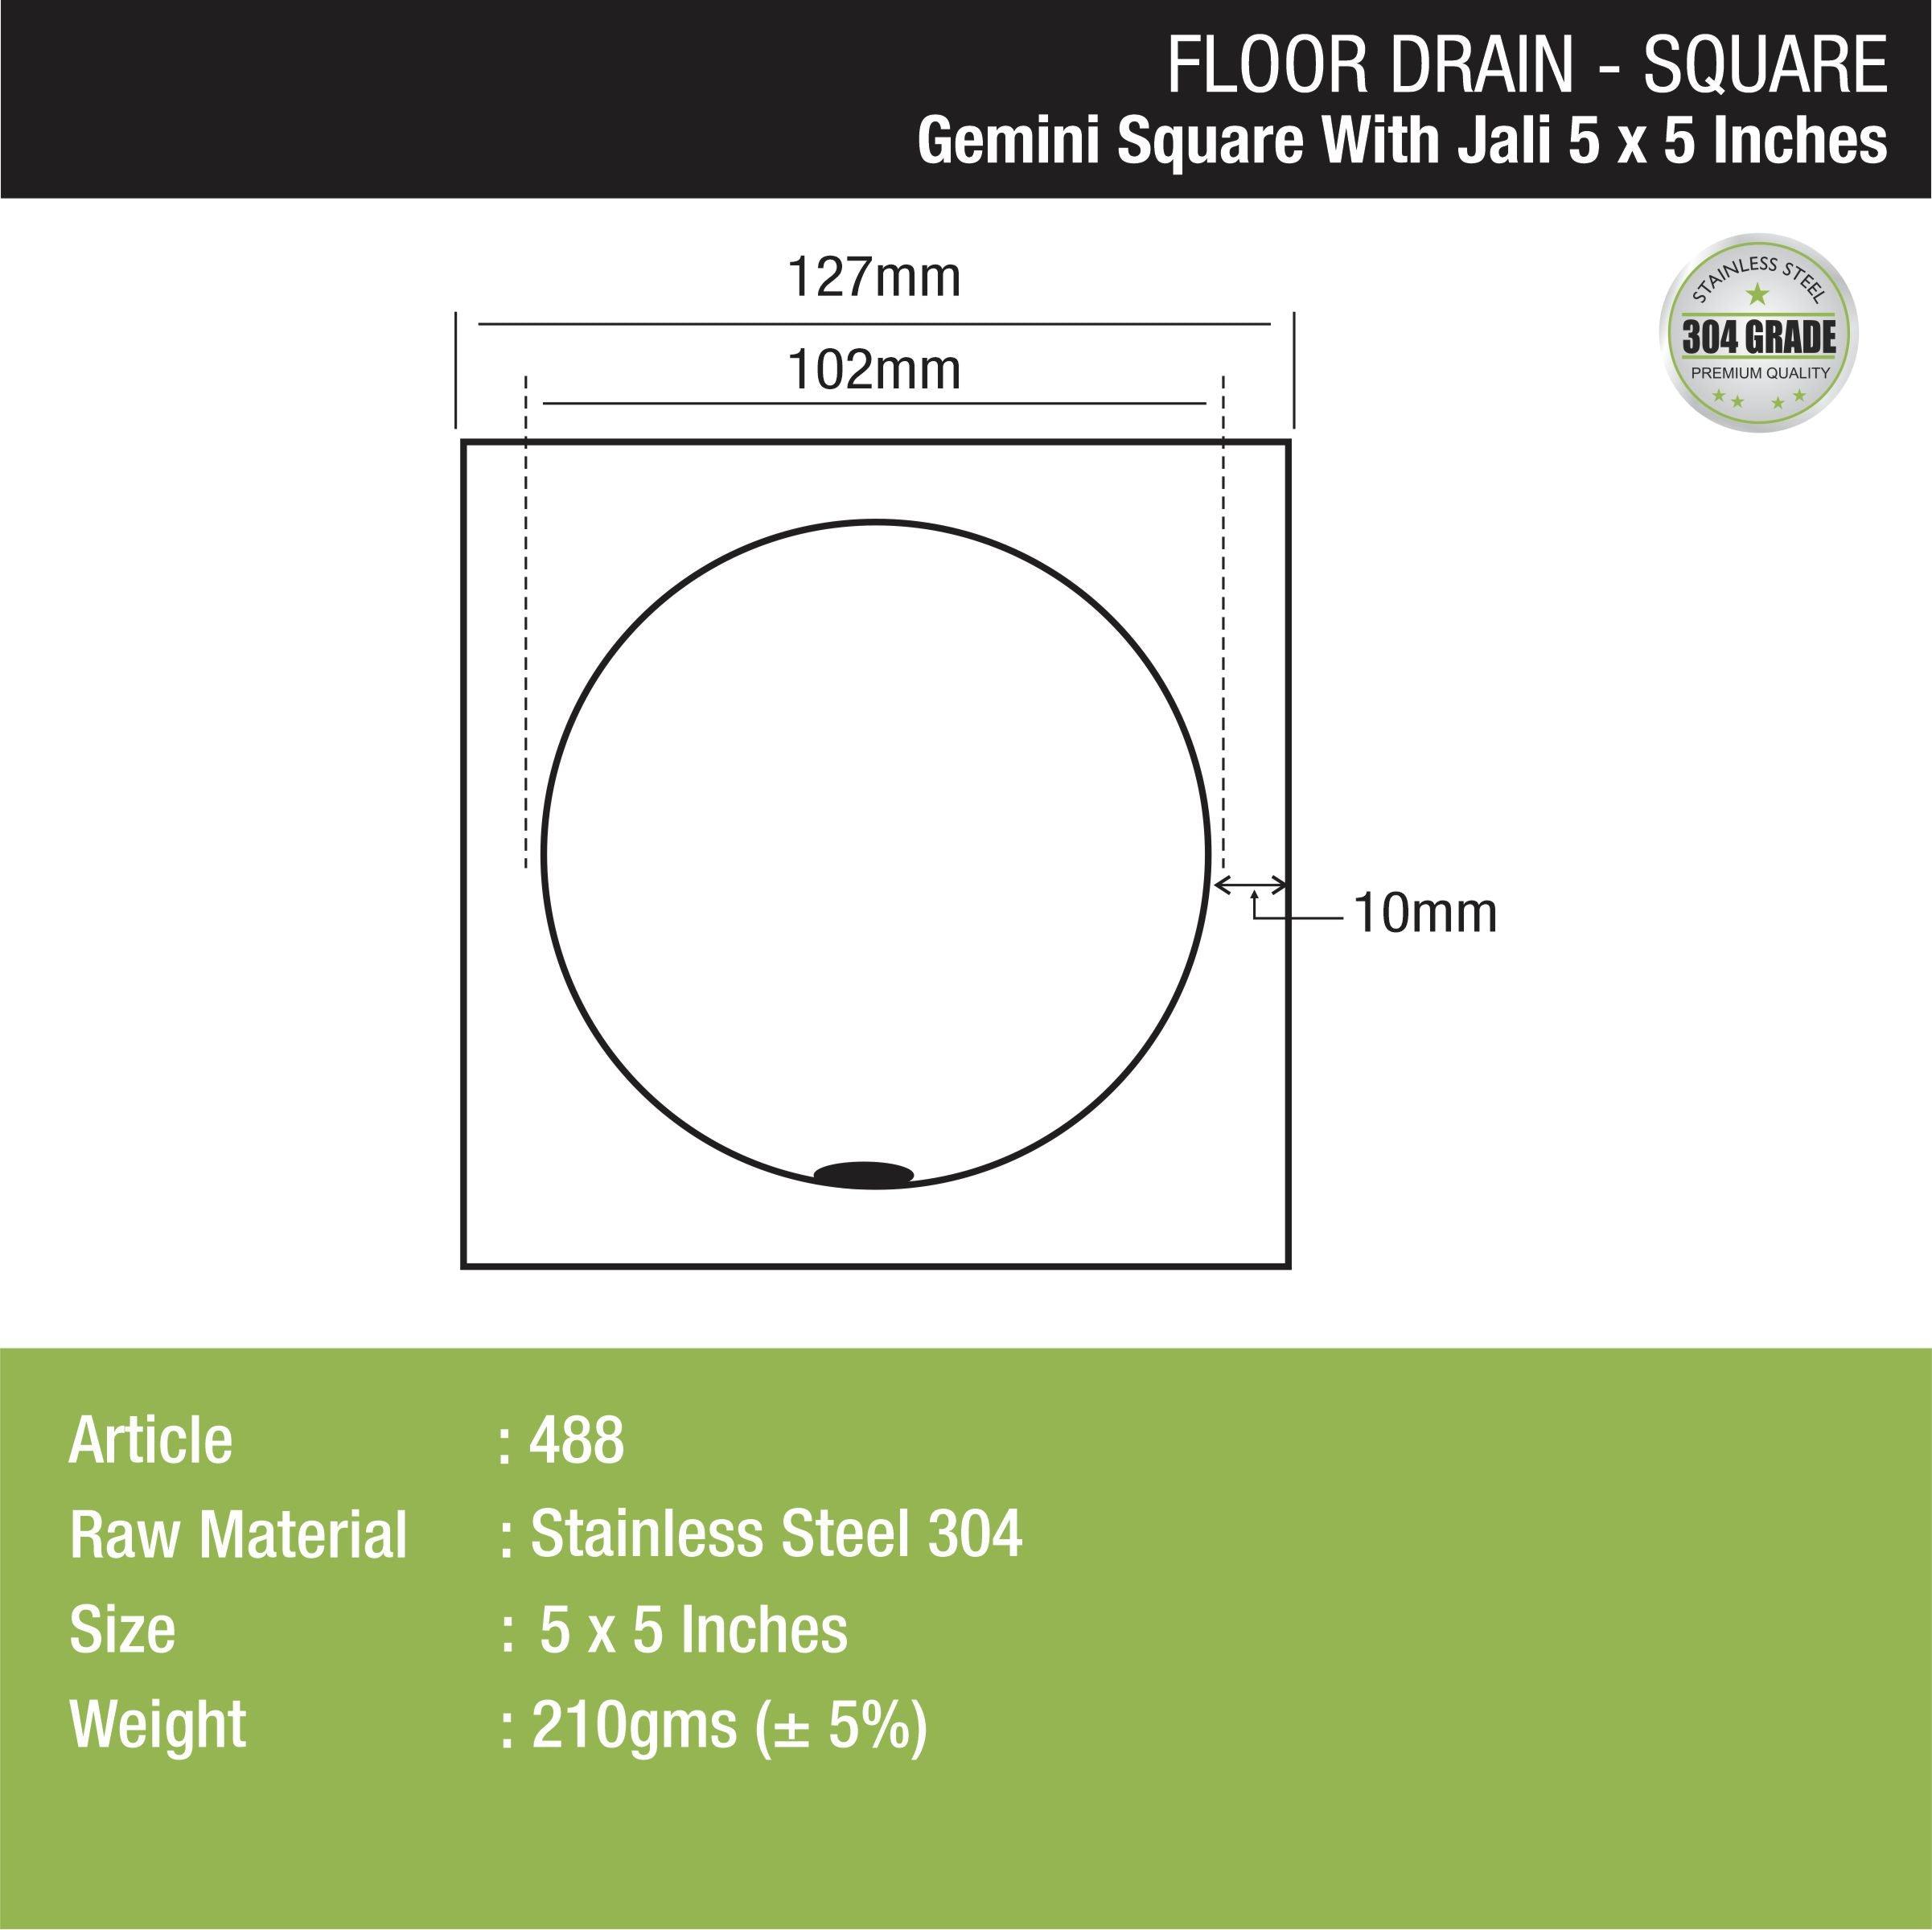 Gemini Square Floor Drain with Jali (5 x 5 Inches) dimensions and sizes